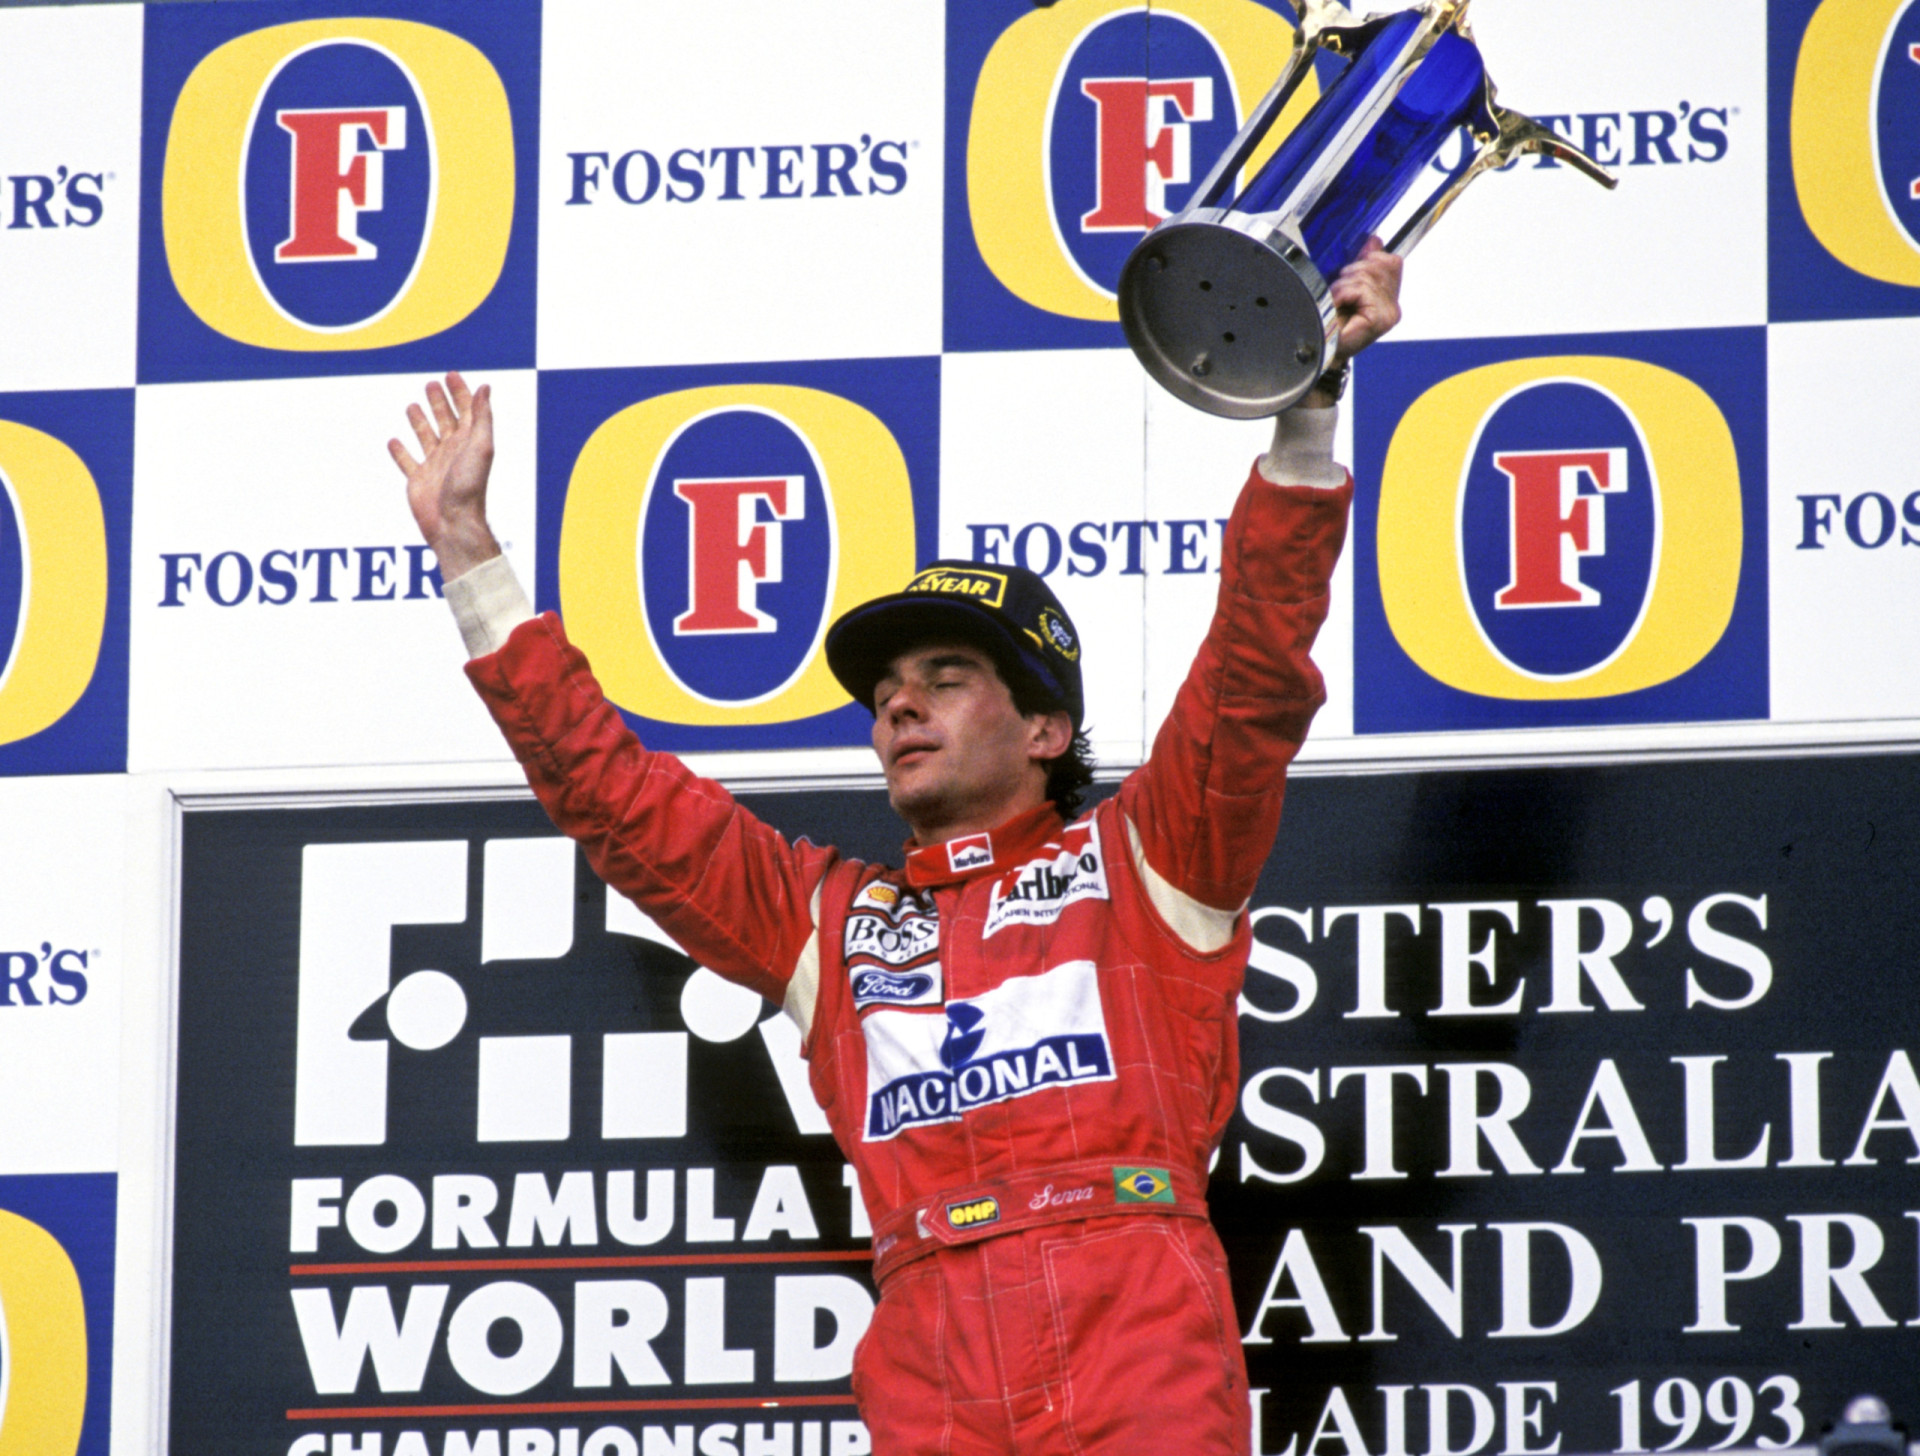 <p>The 1993 season concluded in Australia, with Senna winning his 41st F1 career win, but Prost crowned world champion for the fourth time. No one realized at the time, but this would be the Brazilian legend's last appearance on the podium.</p><p><a href="https://www.msn.com/en-us/community/channel/vid-7xx8mnucu55yw63we9va2gwr7uihbxwc68fxqp25x6tg4ftibpra?cvid=94631541bc0f4f89bfd59158d696ad7e">Follow us and access great exclusive content every day</a></p>